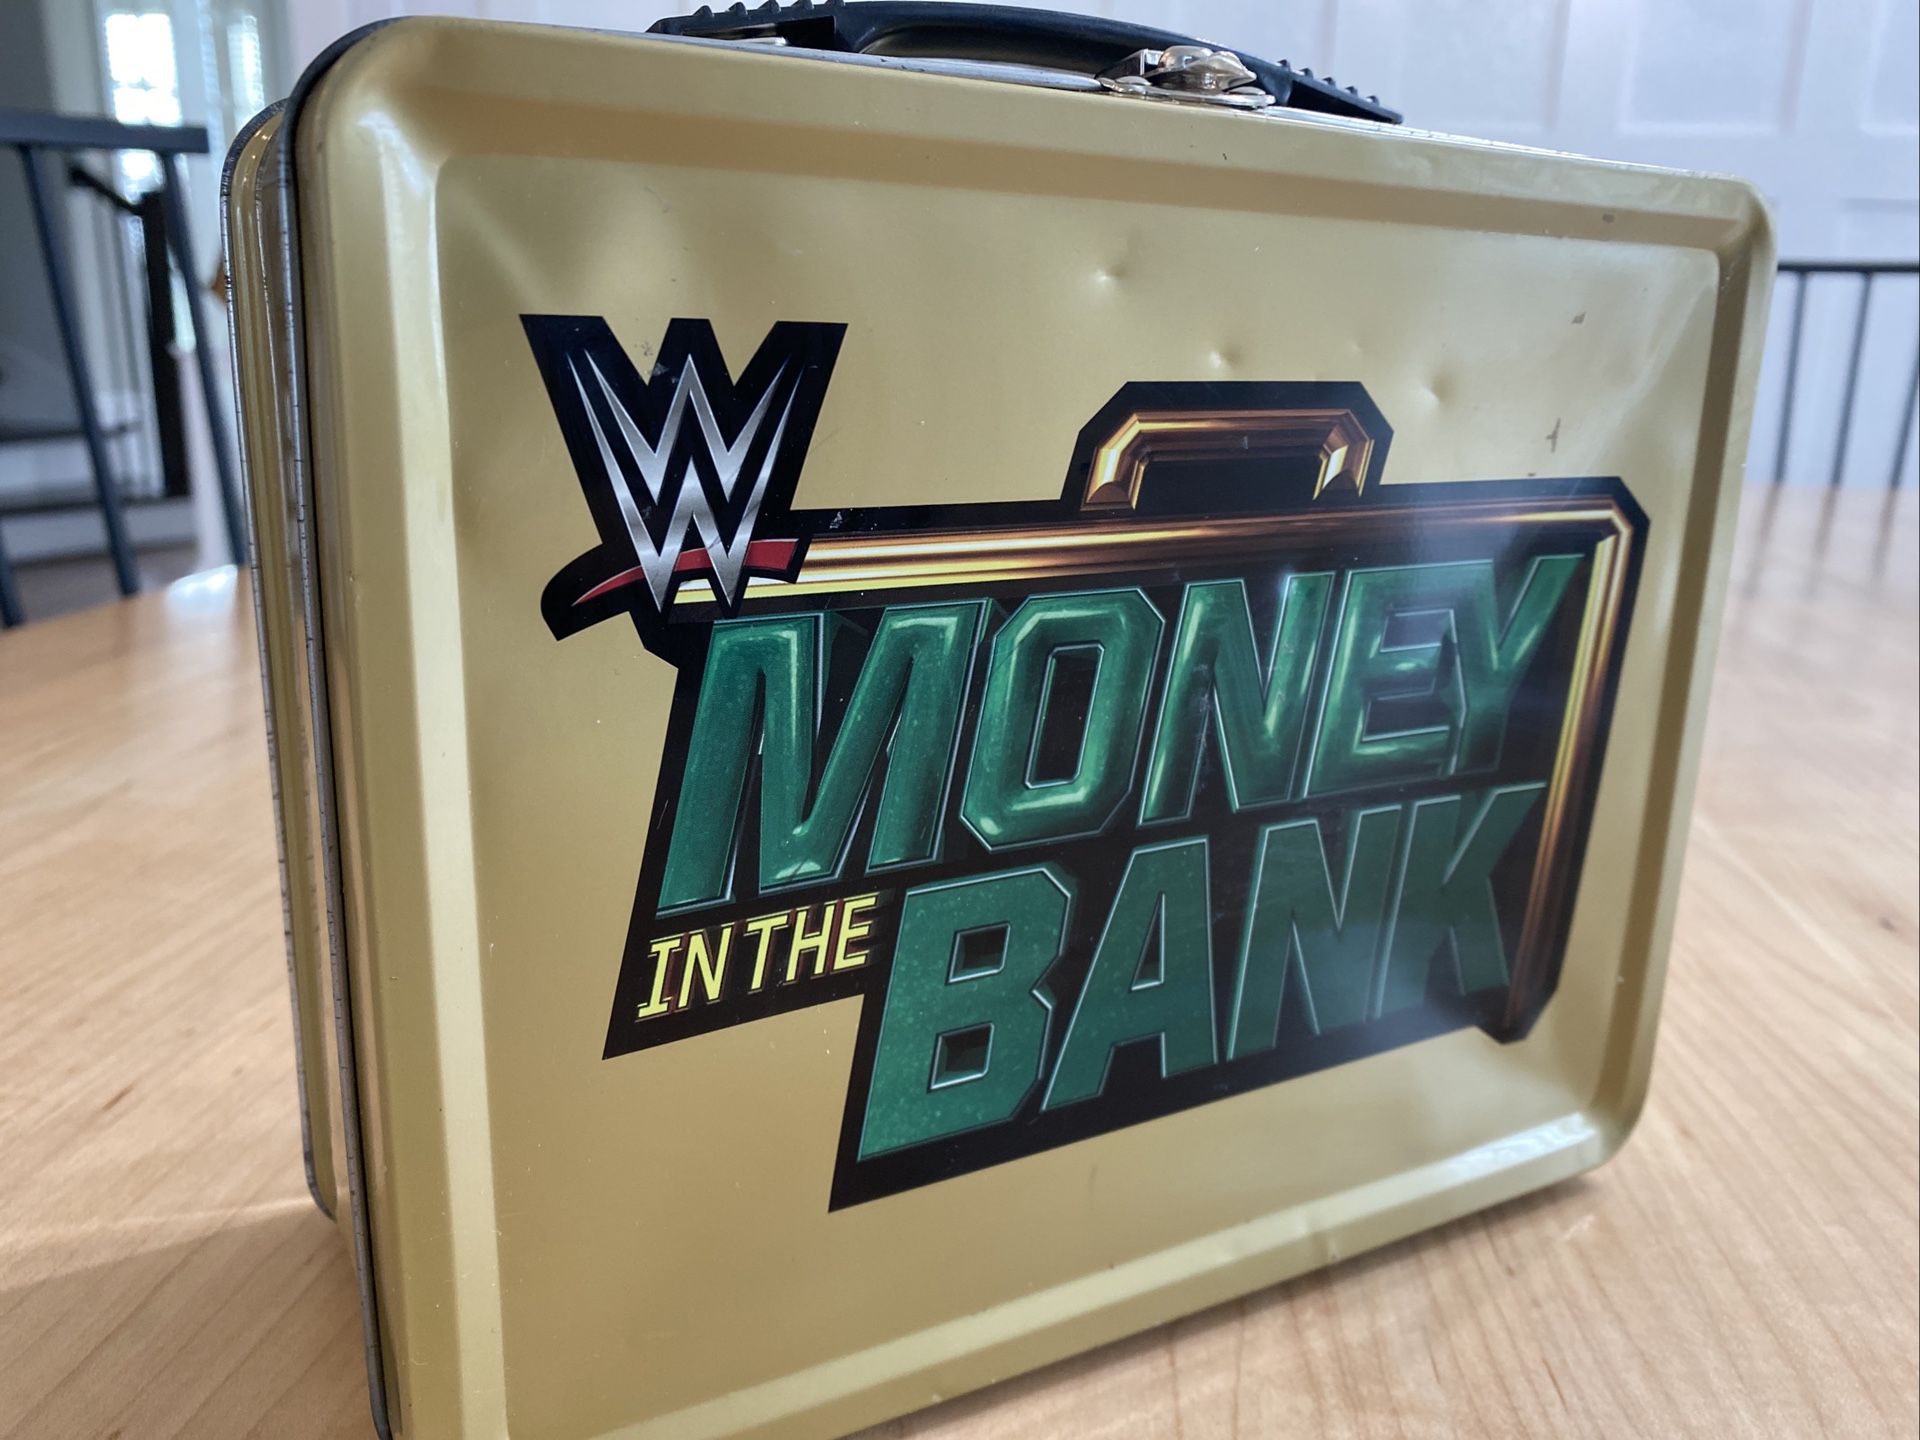 WWE Money in the Bank Tin Lunch Box - Entertainment Earth Exclusive